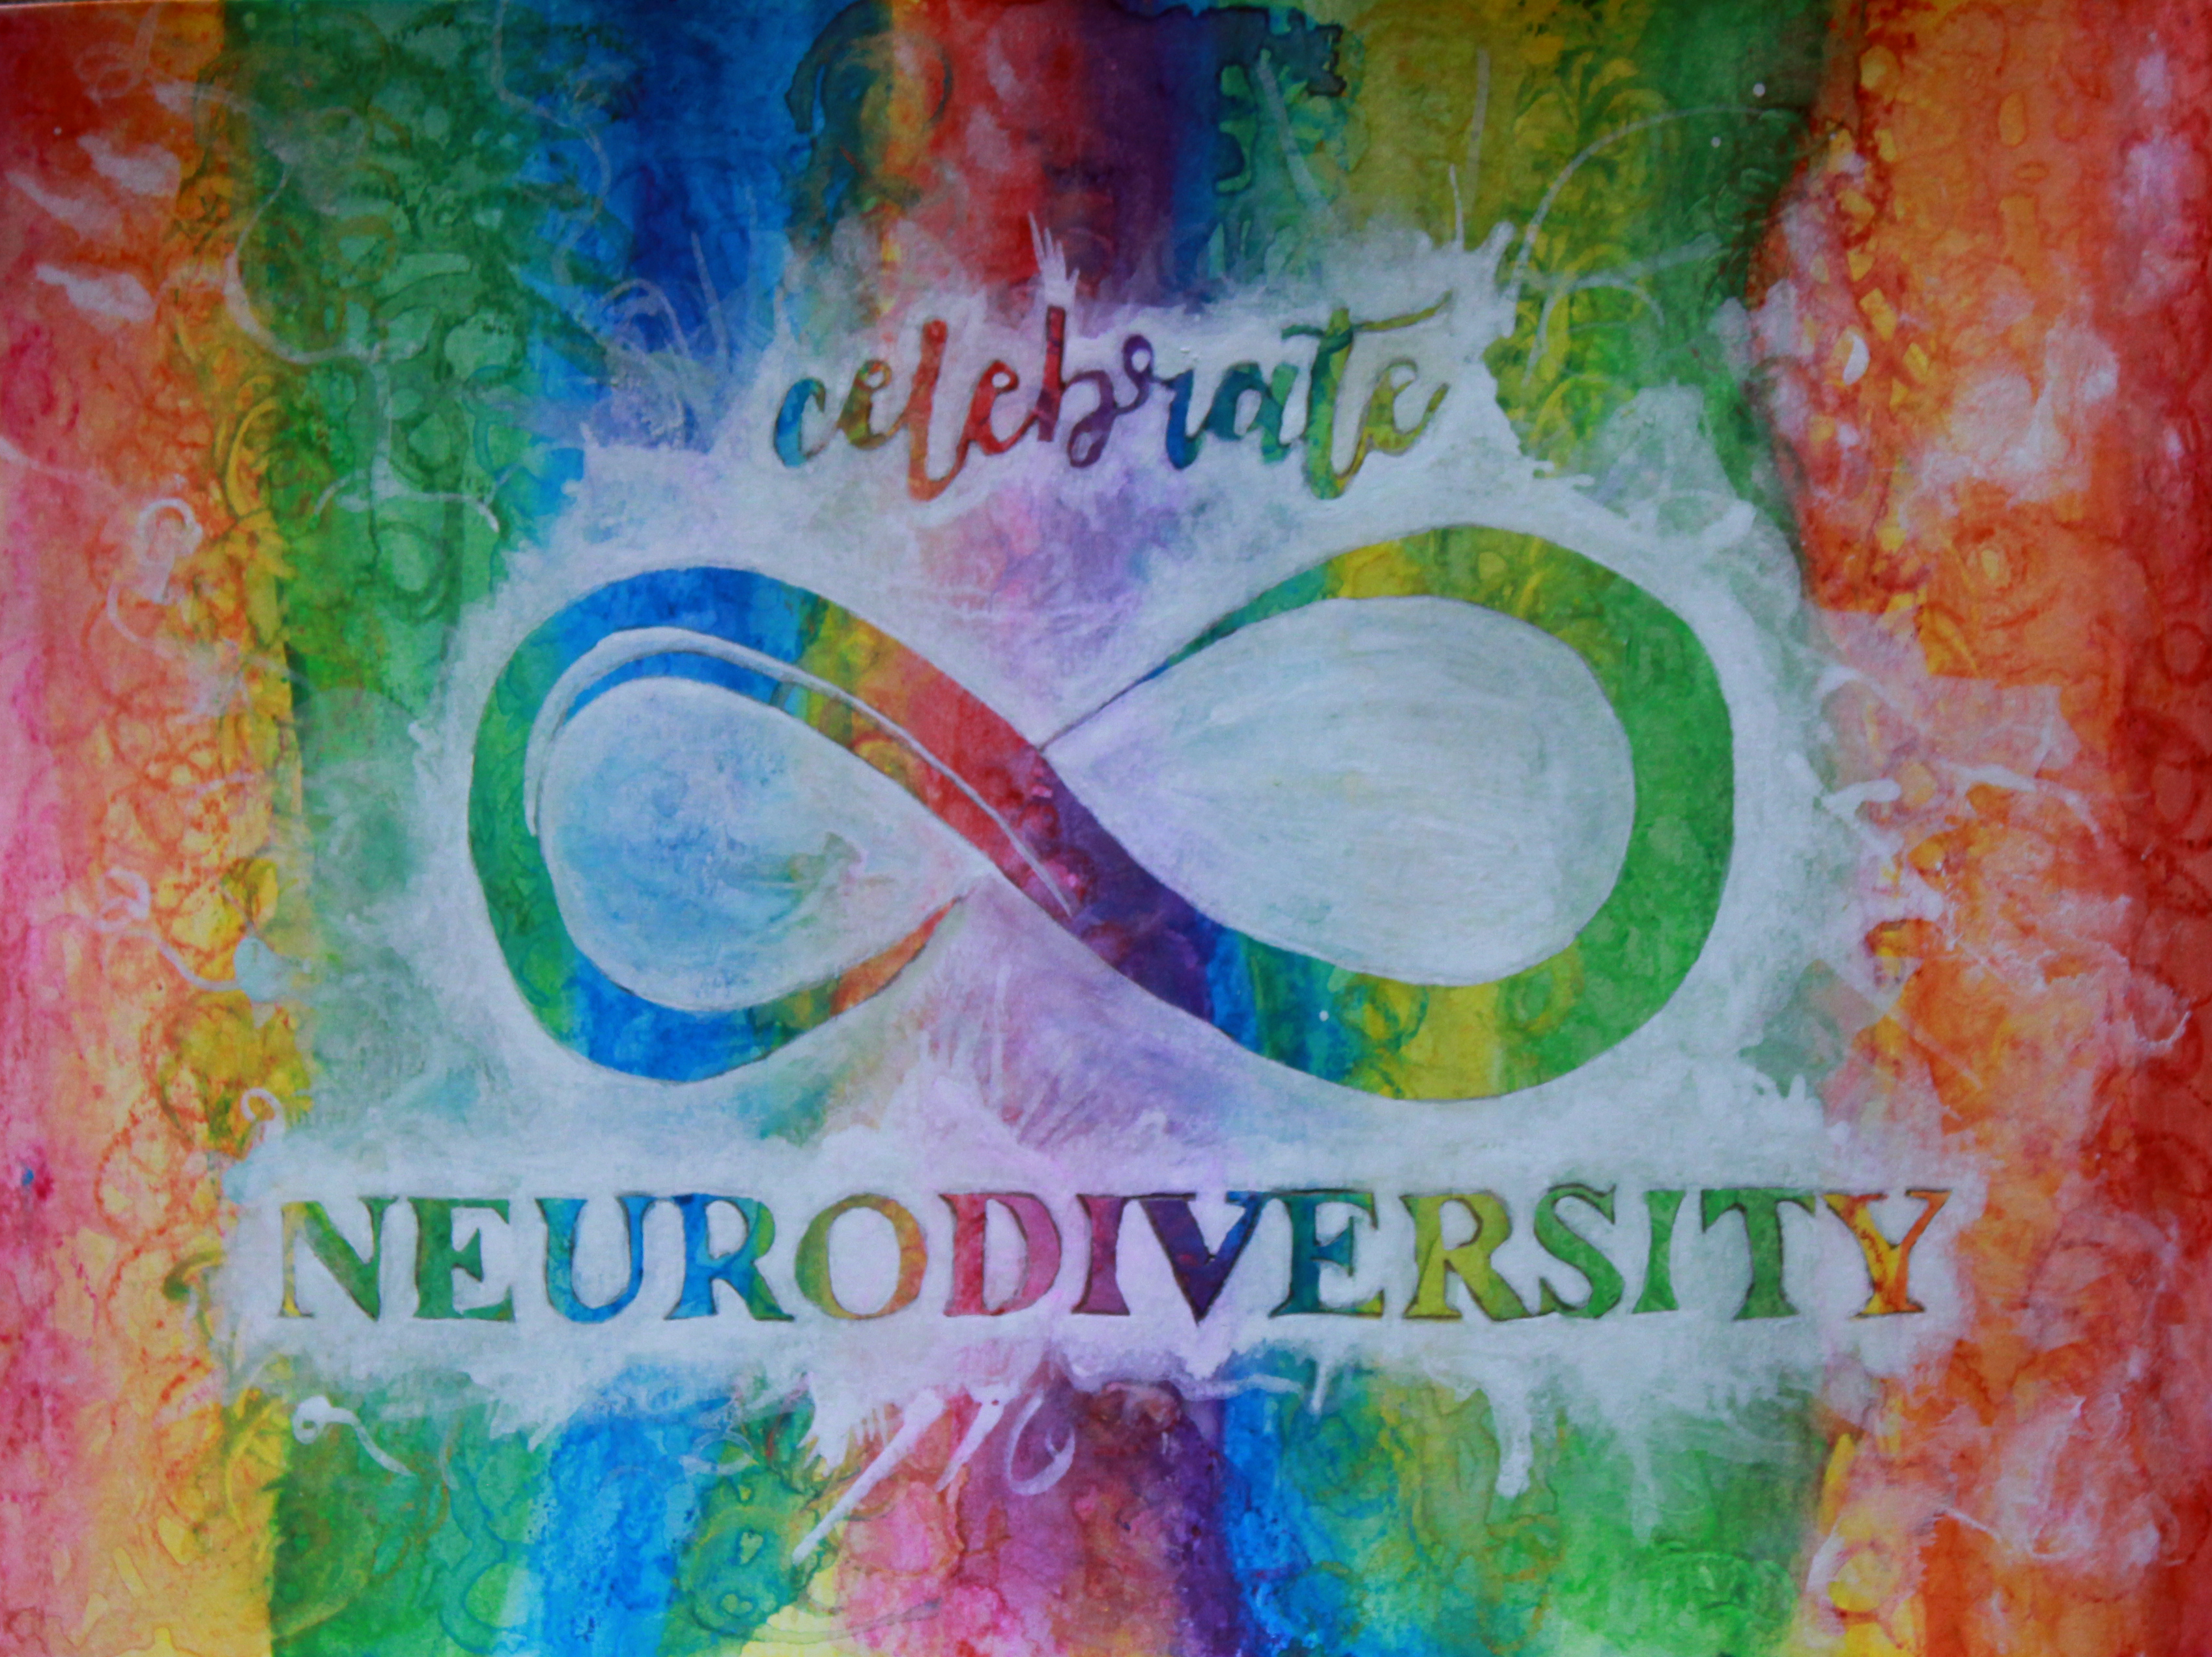 the background has vertical watercolor stripes that blend together in a rainbow pattern. The foreground shows the neurodiversity infinity symbol, with the word "celebrate" above and "neurodiversity" below, from white semi-transparent acrylic paint. It looks like a white splash on a rainbow background with the words and symbols unpainted, so that the words and symbol have the same rainbow coloring as the background via negative space.